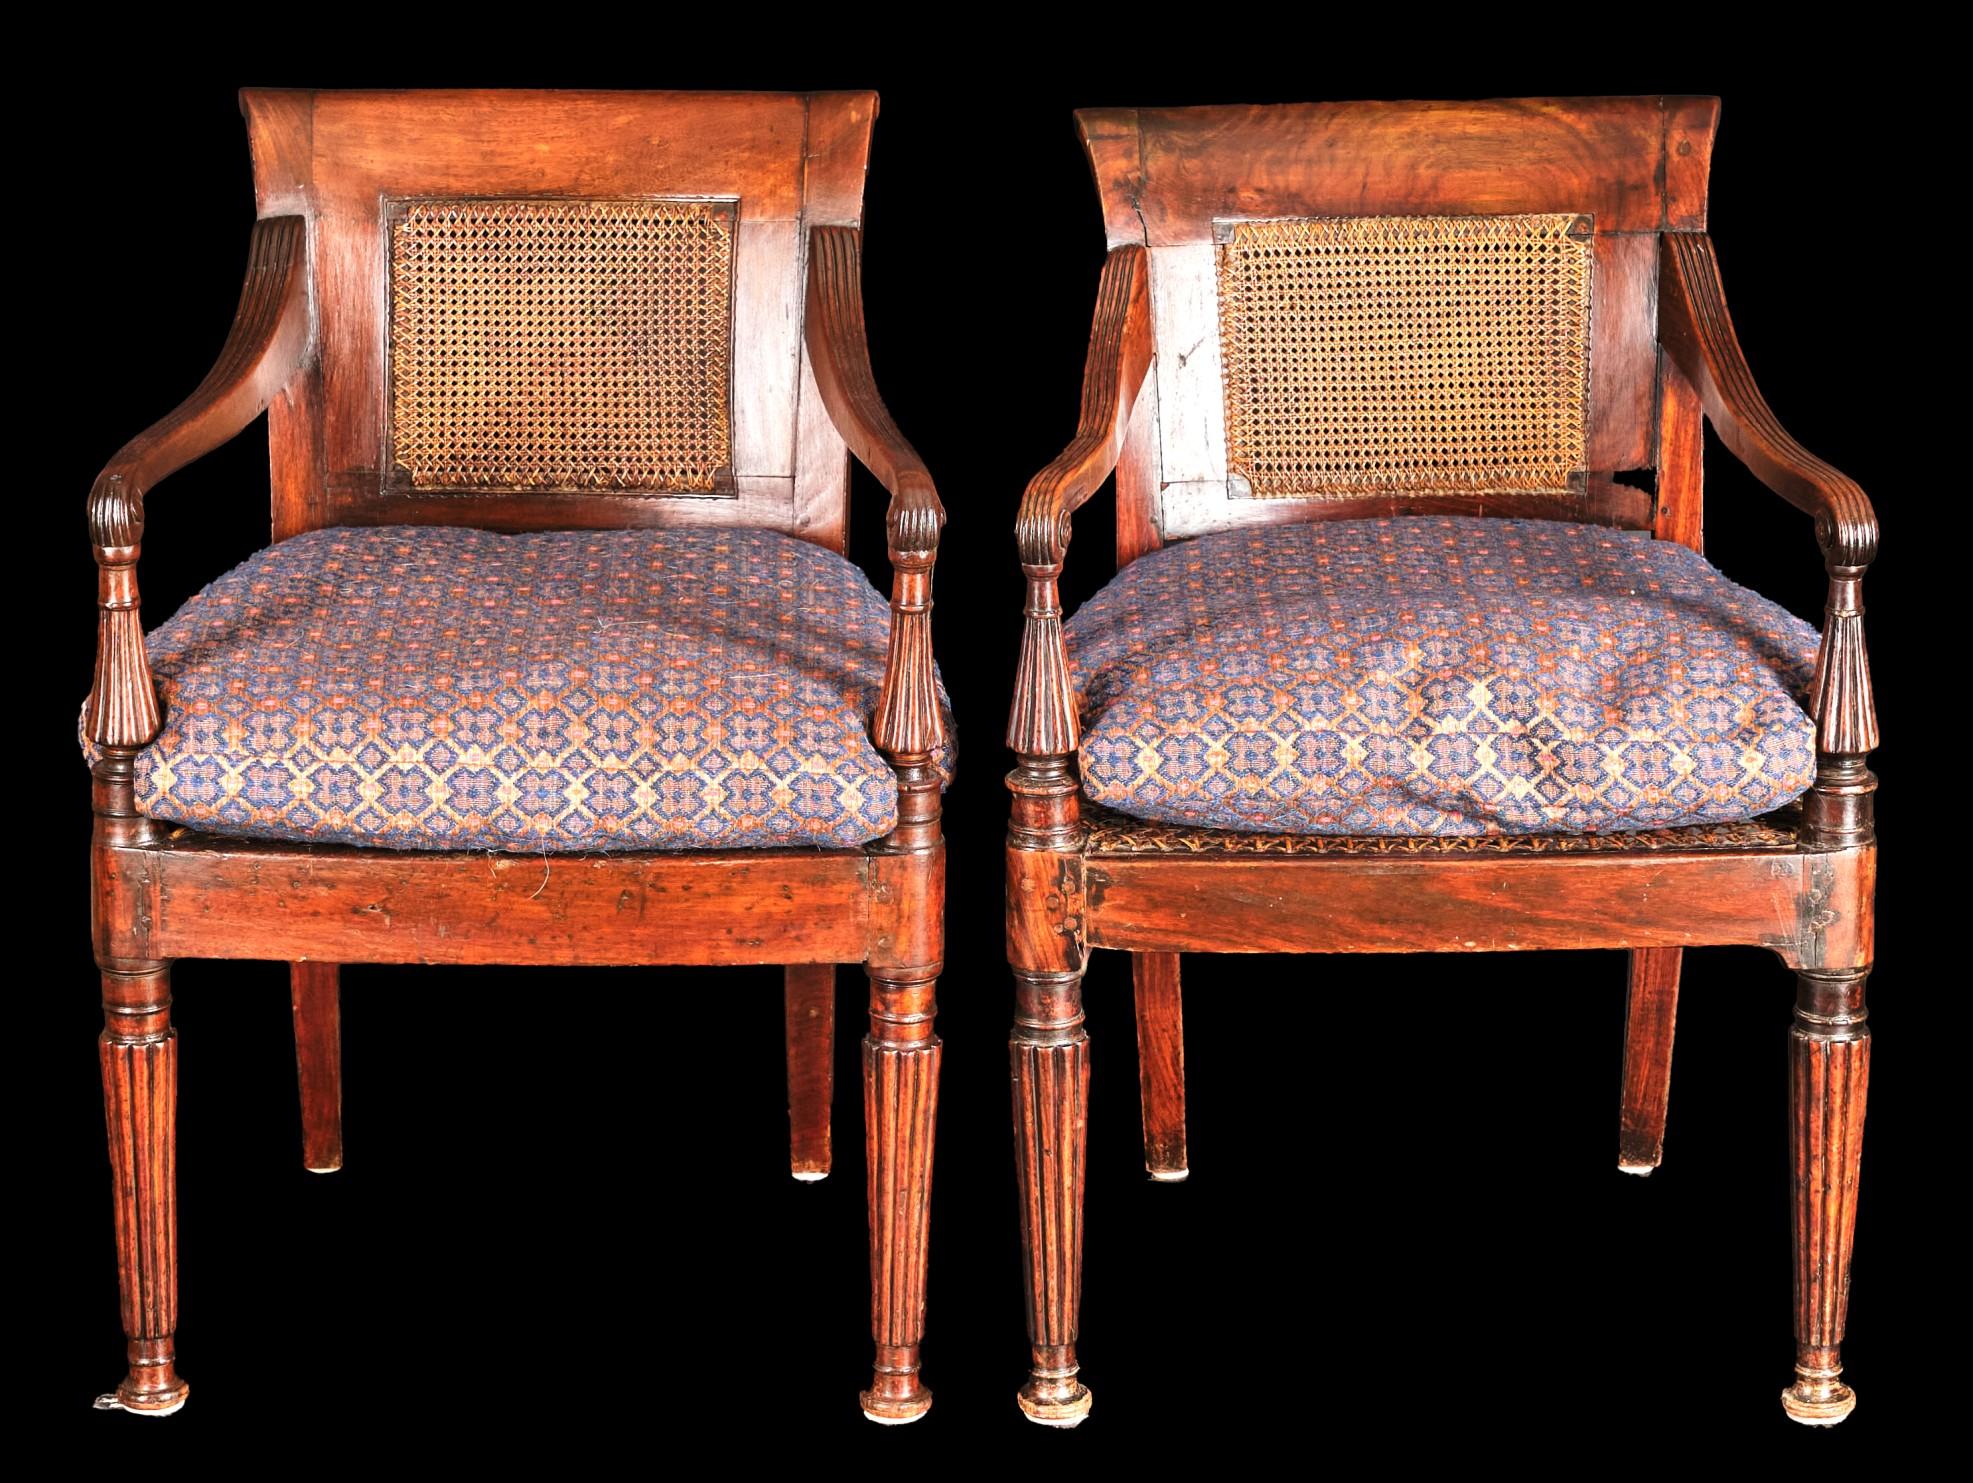 A Handsome Pair of 19th Century Anglo-Indian Padouk Wood Armchairs, Circa 1830 For Sale 4